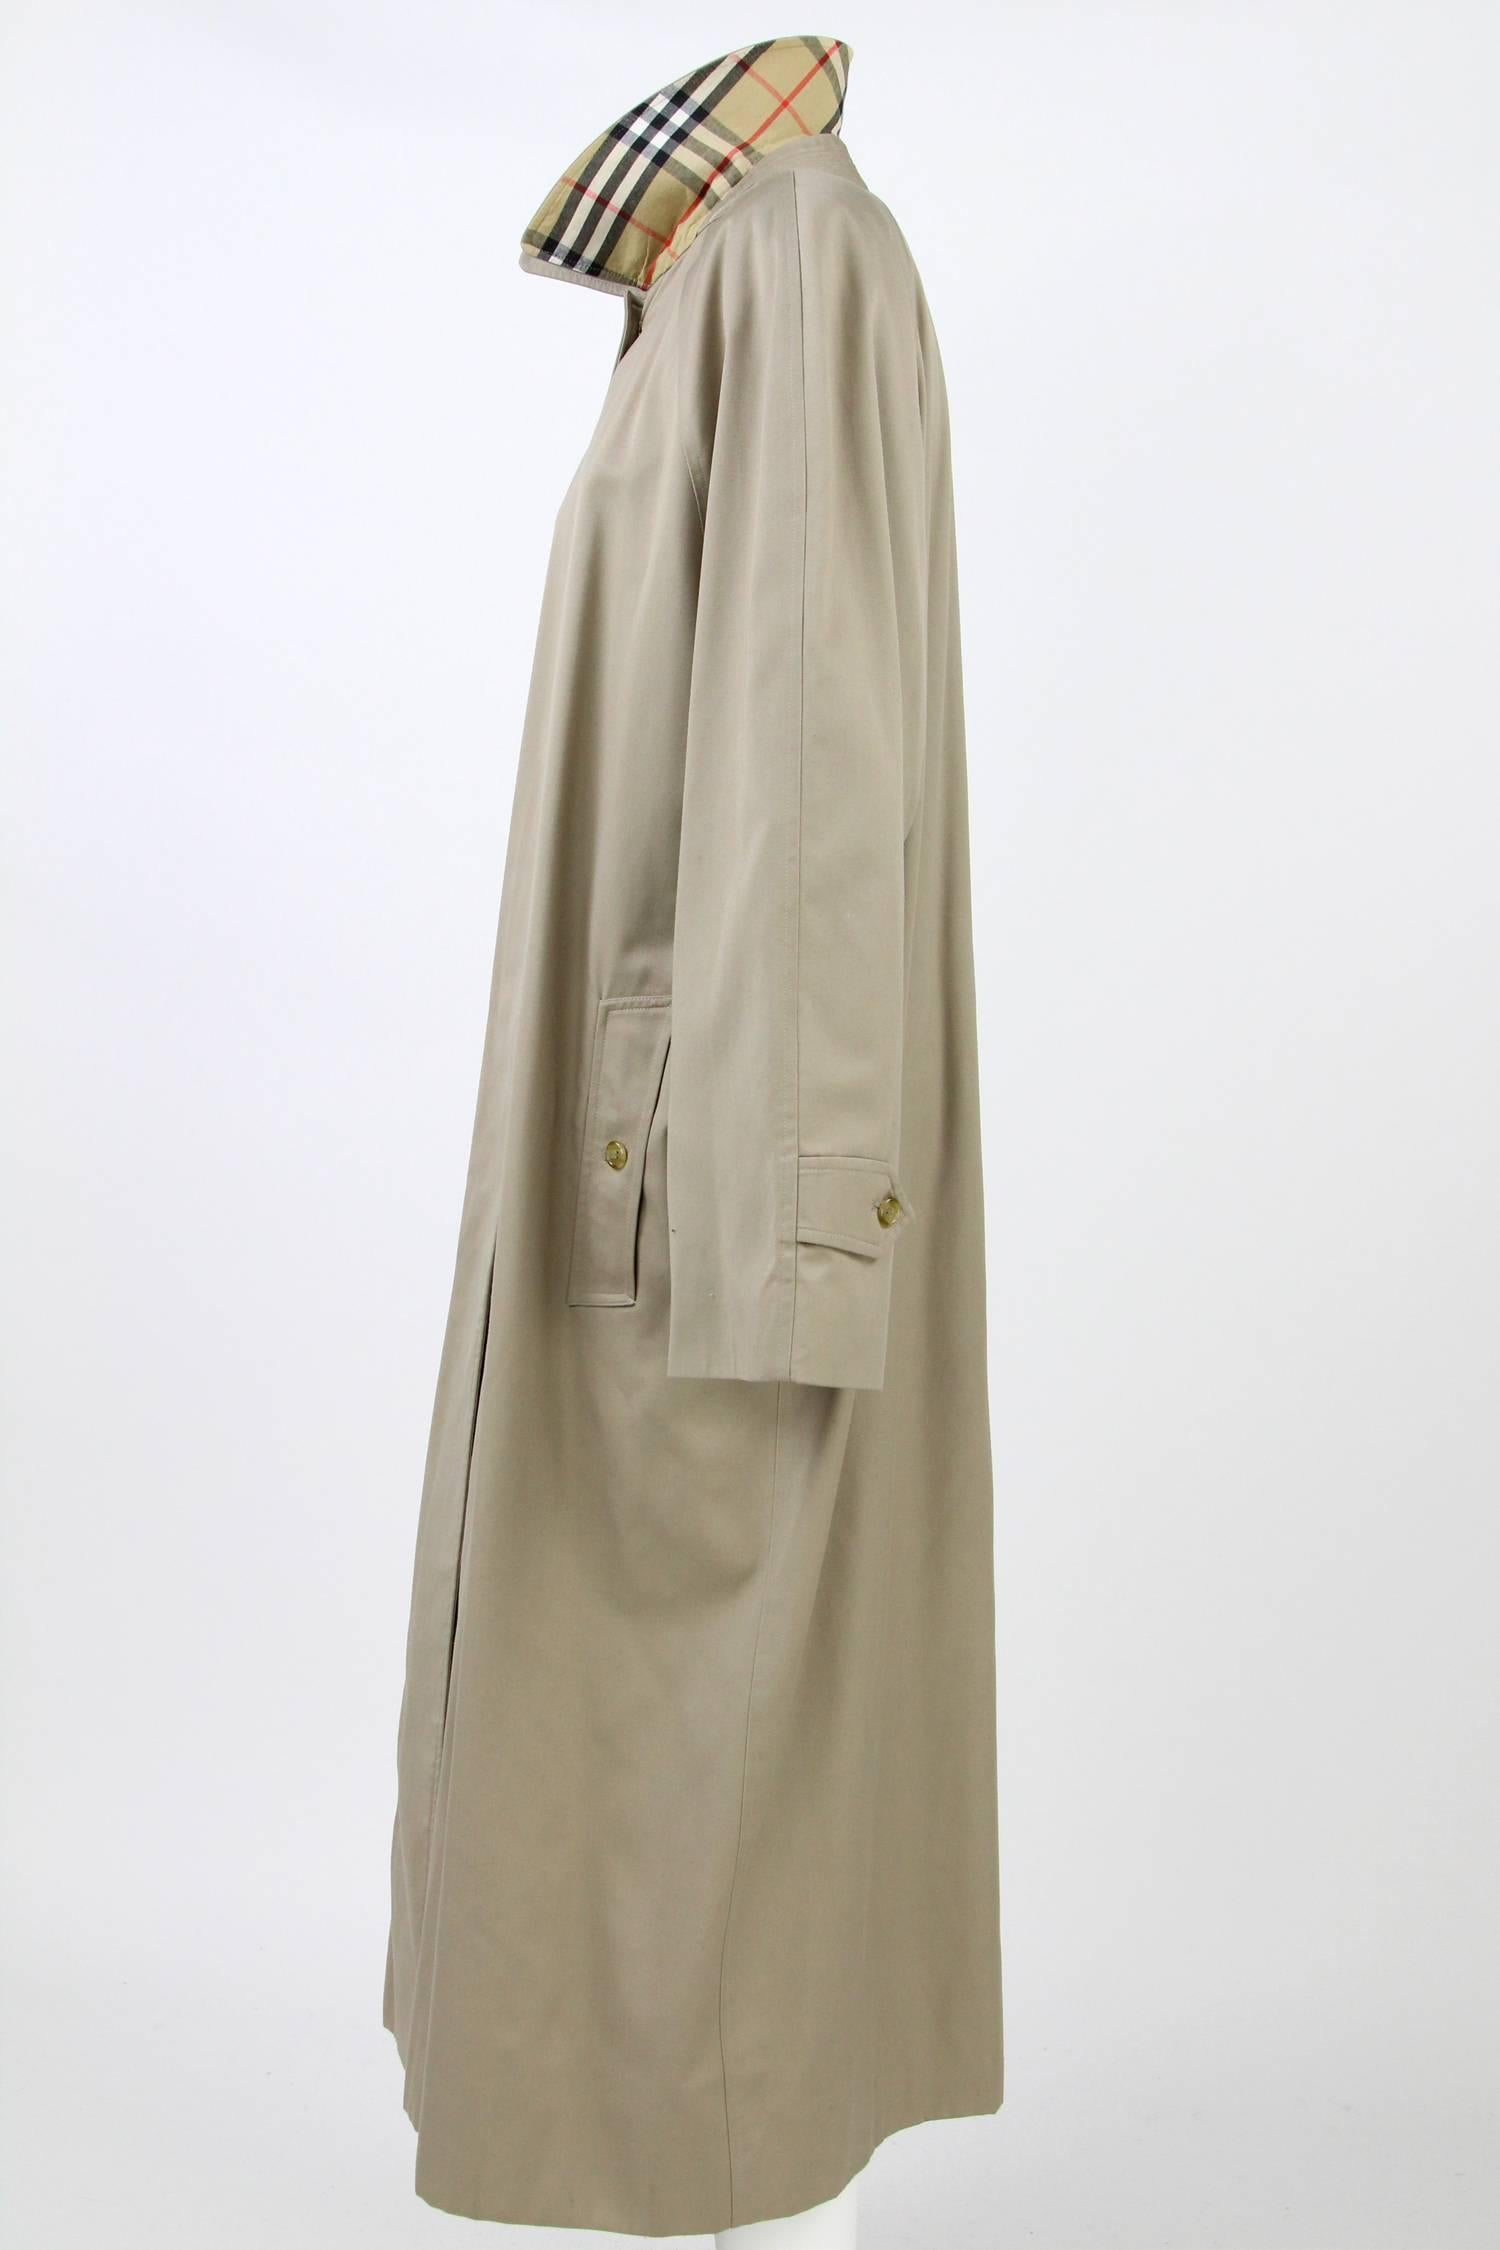 Classy cotton trench by Burberry, featuring cotton blend tartan lining and two front pockets, made in England.
Size 20 UK.

130 cm (l)